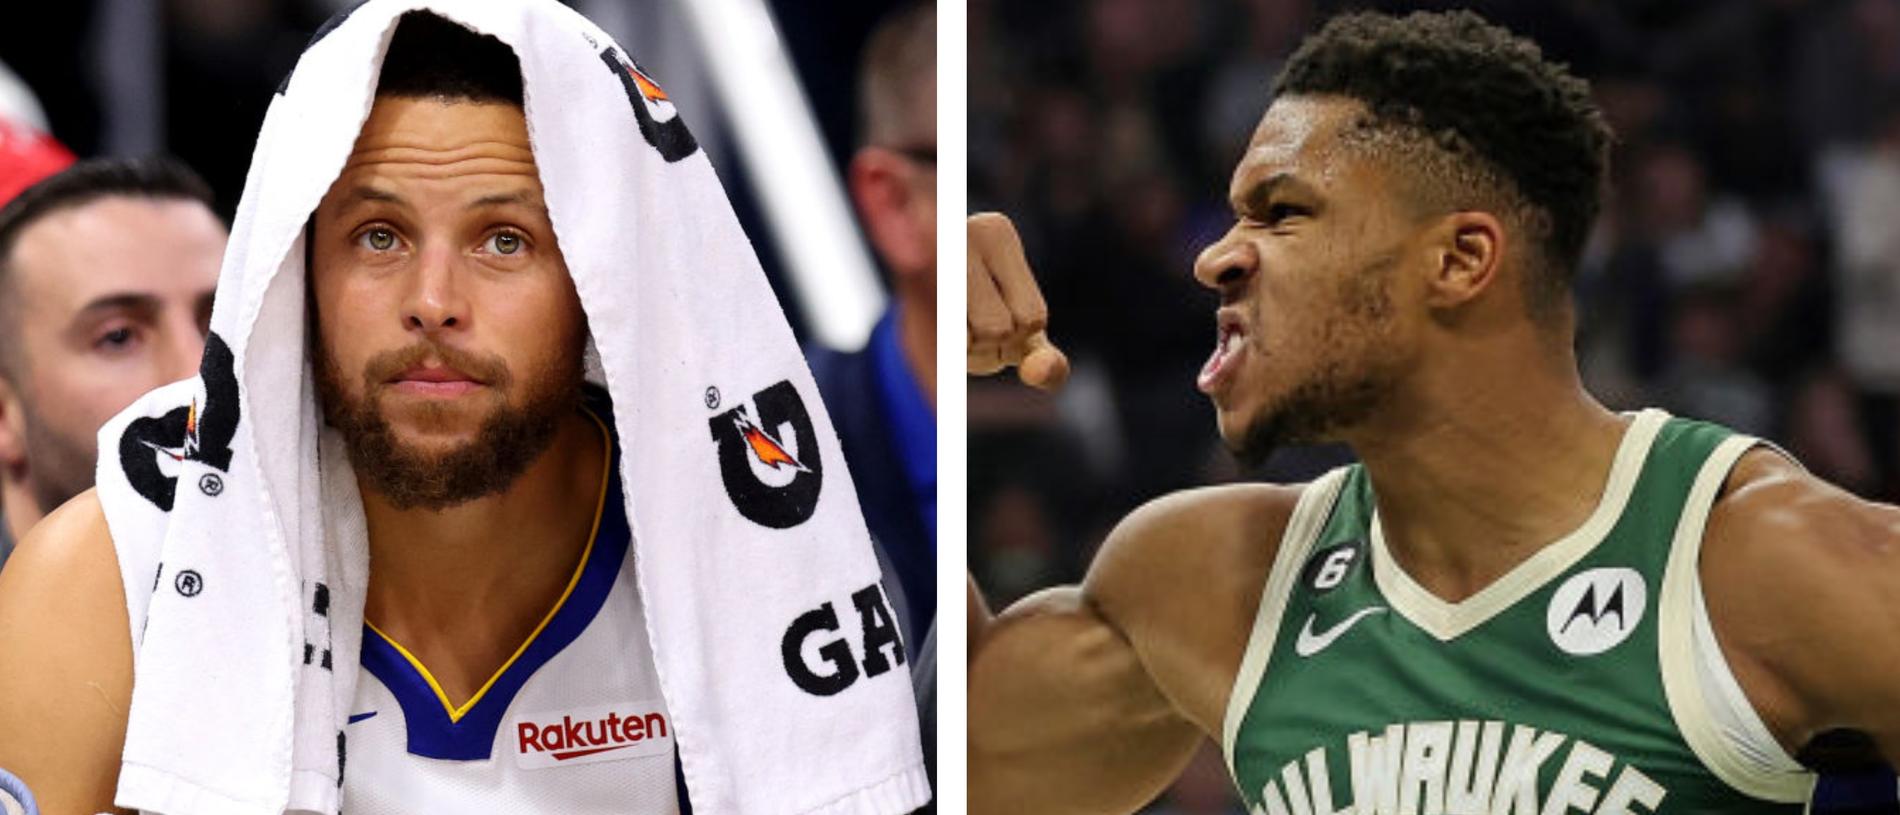 NBA news, analysis: Best players, top 10 rankings, Giannis, Luka Doncic,  Zion Williamson, Ben Simmons